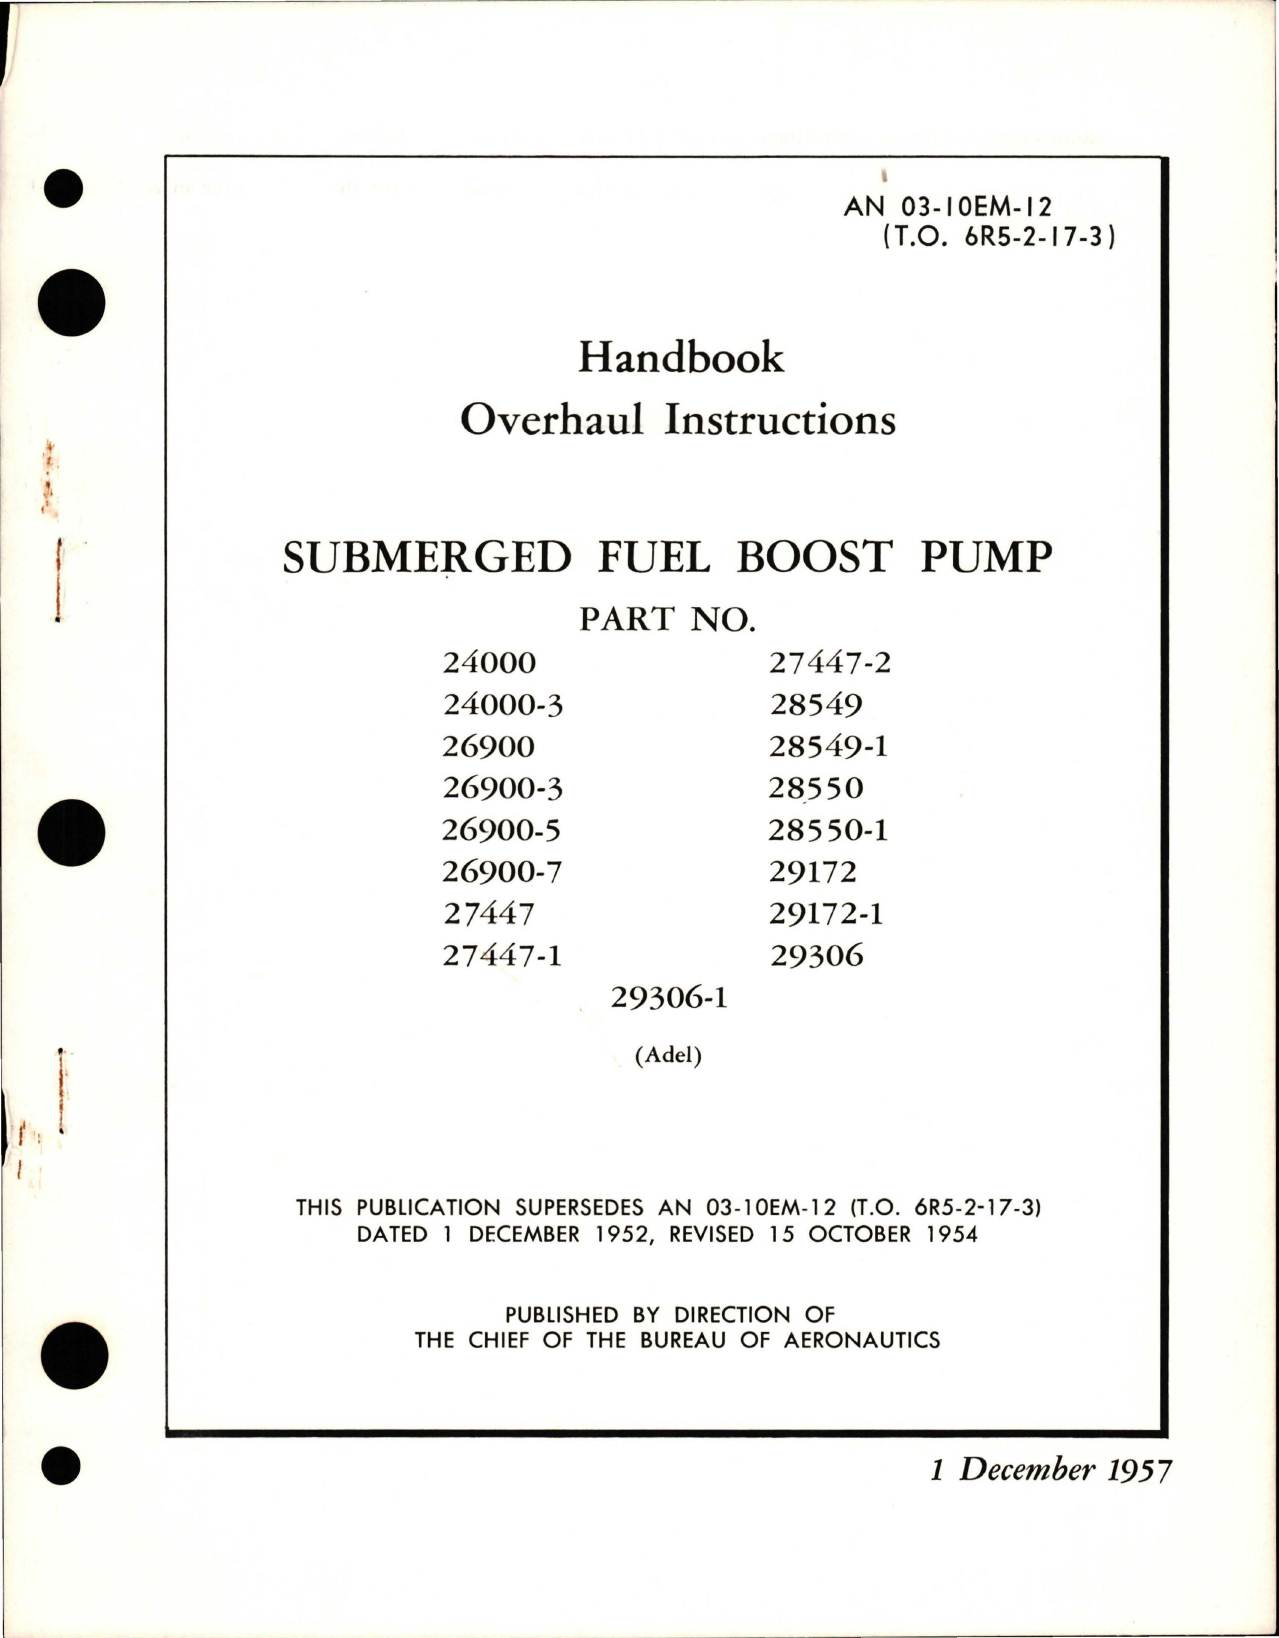 Sample page 1 from AirCorps Library document: Overhaul Instructions for Submerged Fuel Boost Pump